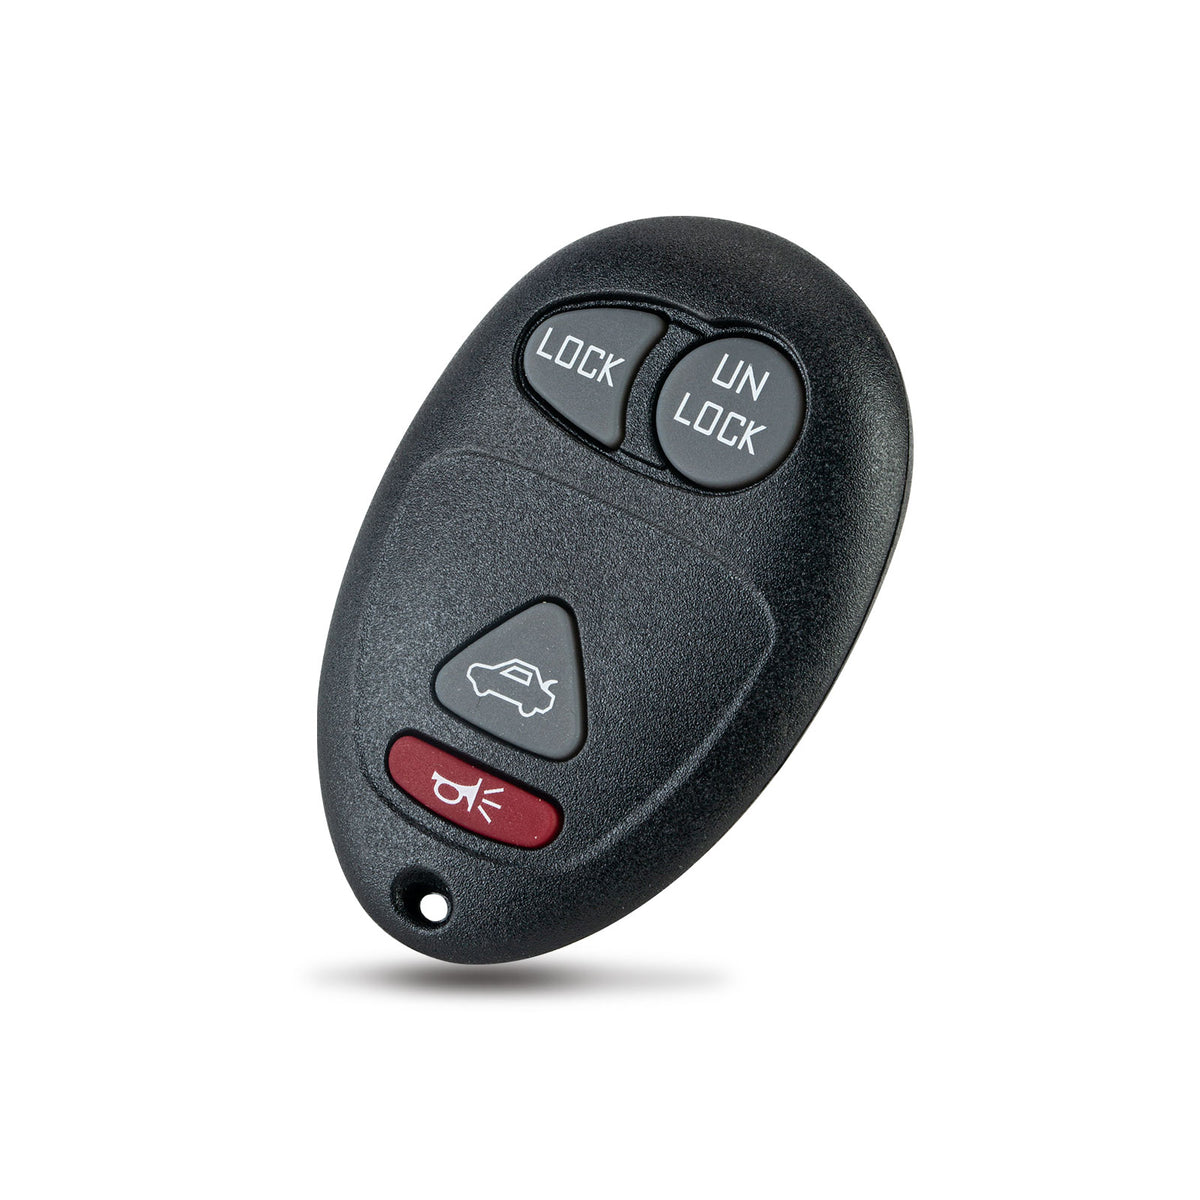 Extra-Partss Remote Car Key Fob Replacement for Buick L2C0007T fits 2001 2002 2003 2004 Century Regal